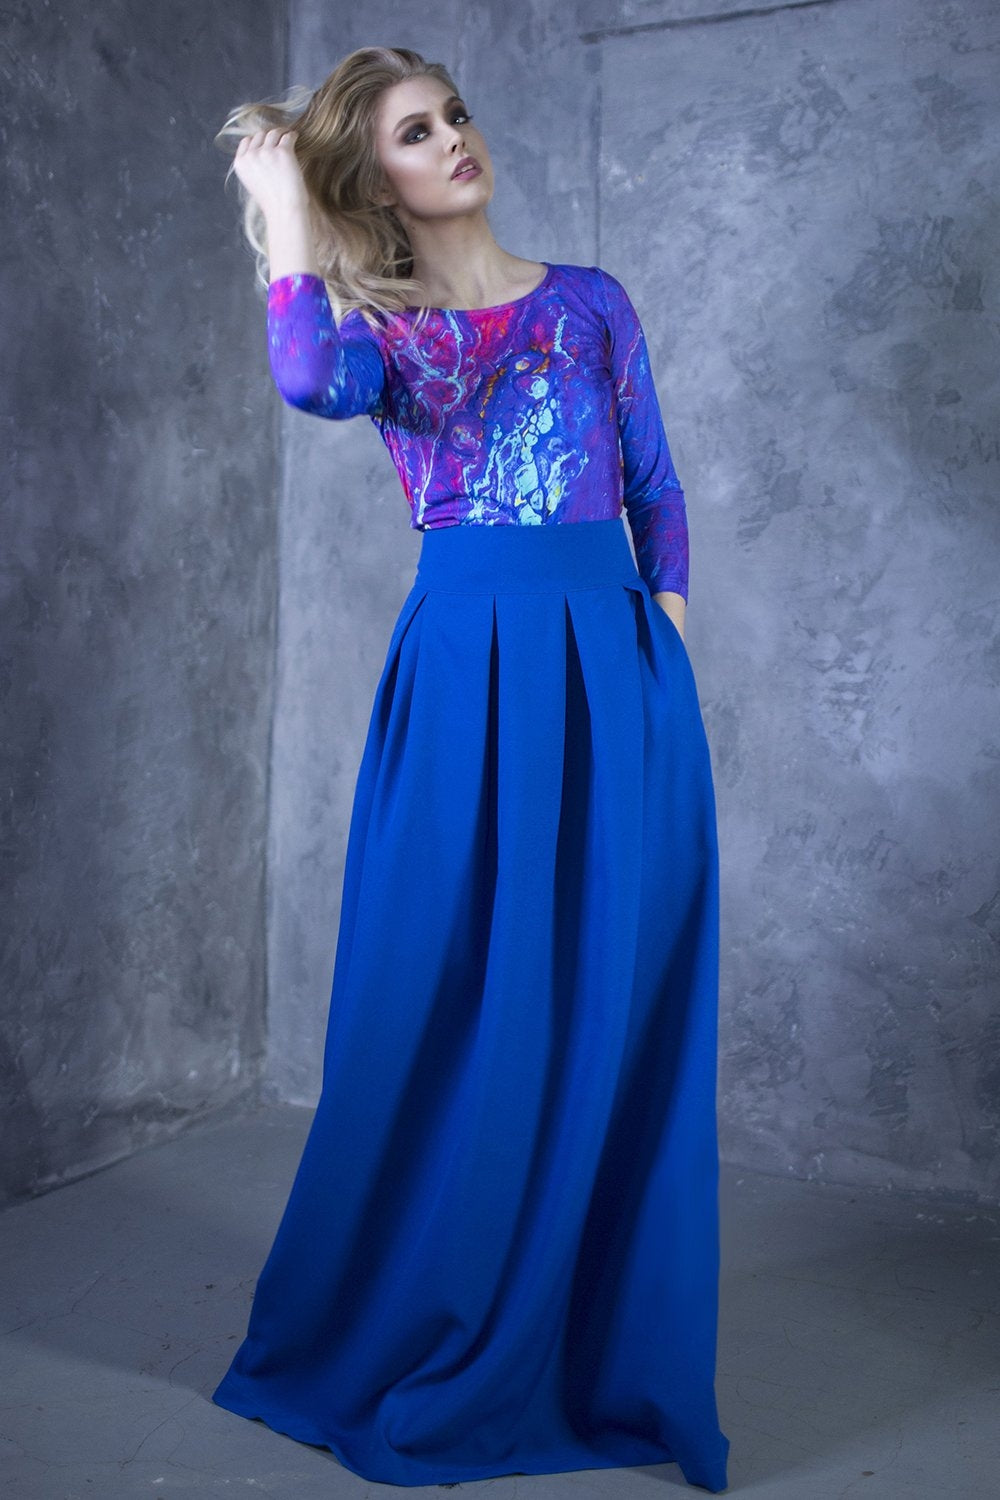 Blue full maxi skirts with side pockets